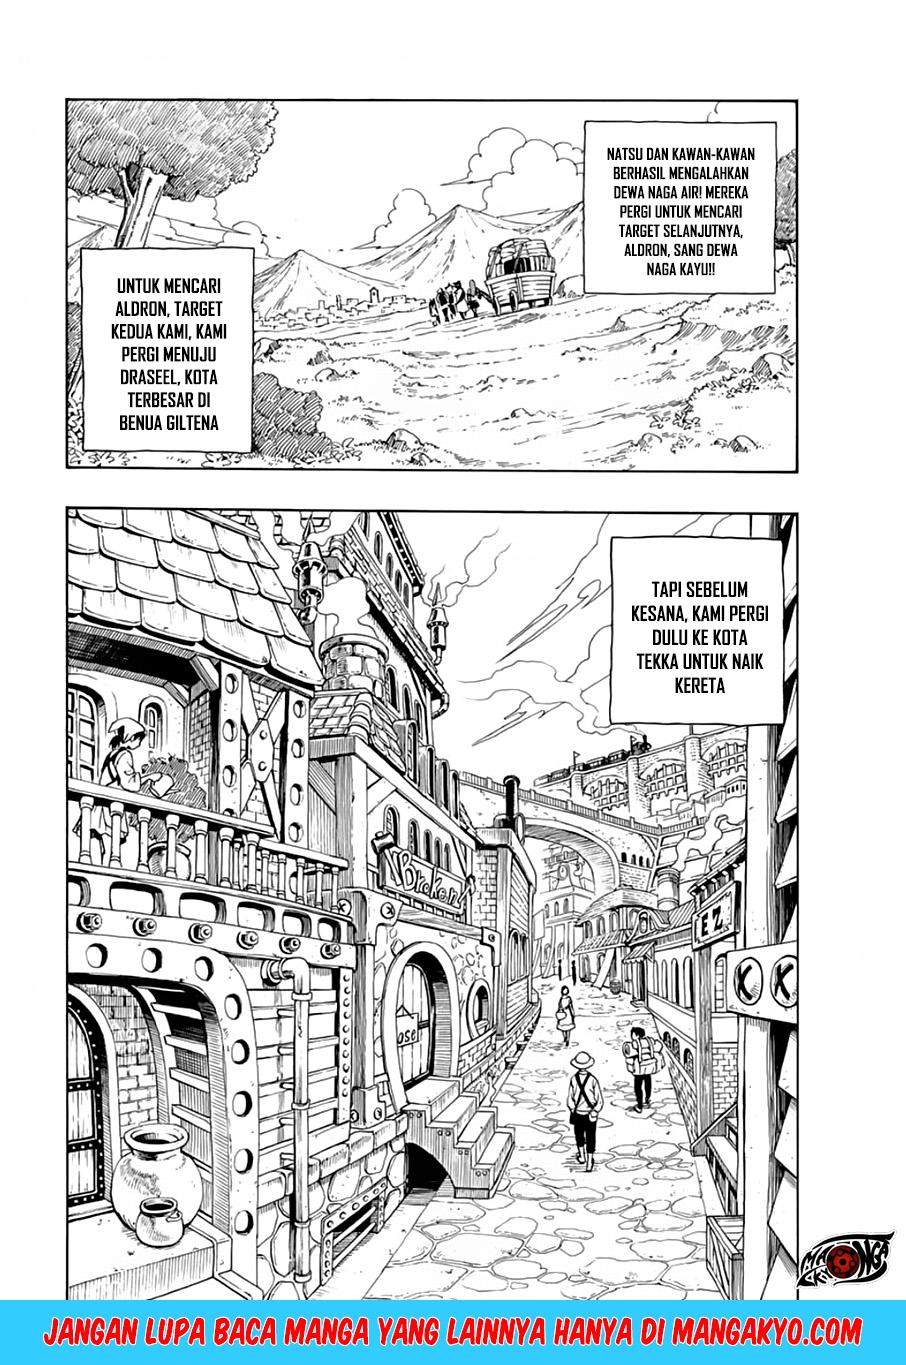 Fairy Tail: 100 Years Quest Chapter 25 Bahasa Indonesia